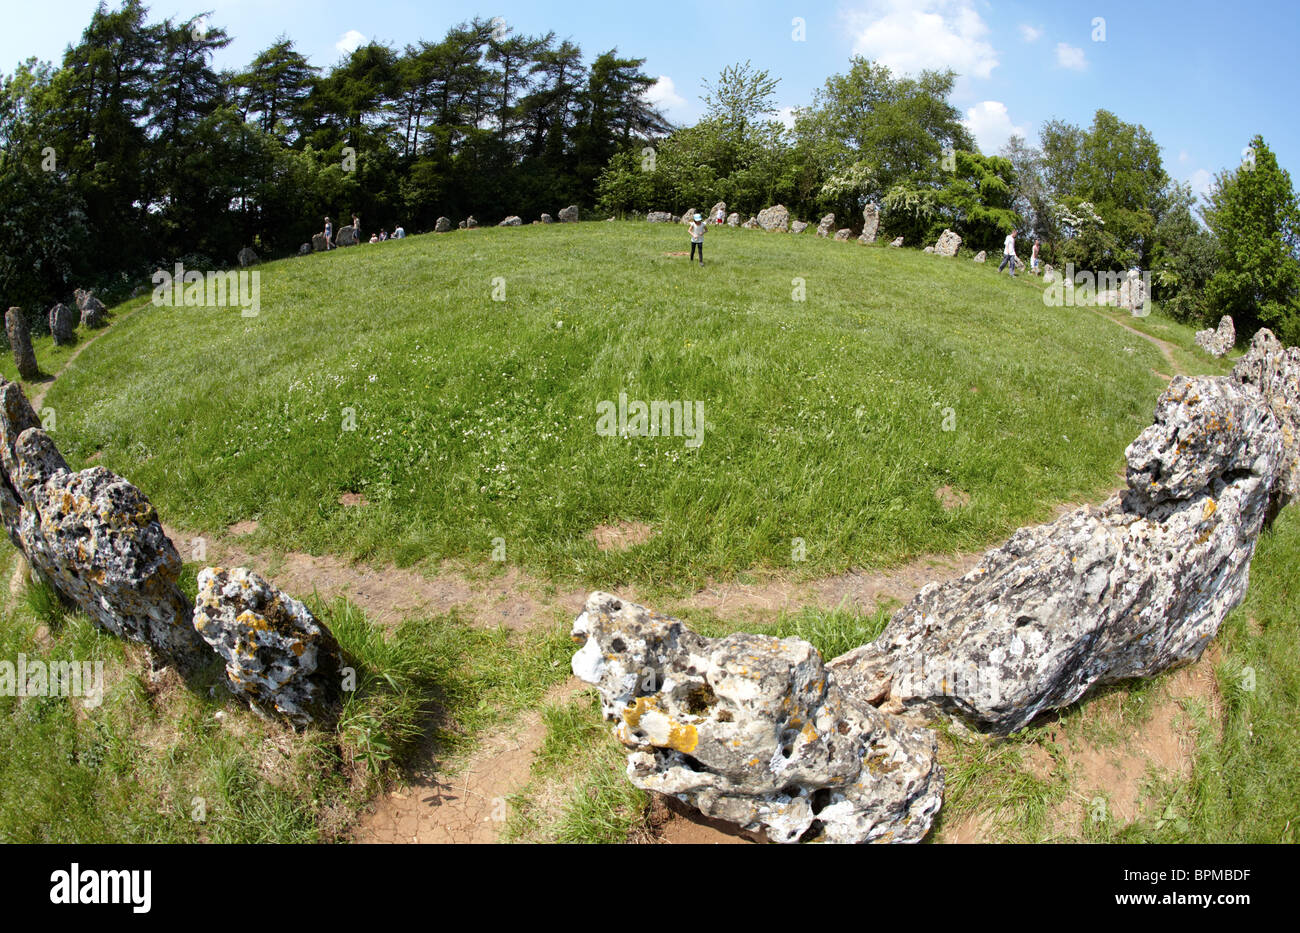 Rois Hommes Stone Circle Les Cotswolds angleterre Europe Banque D'Images